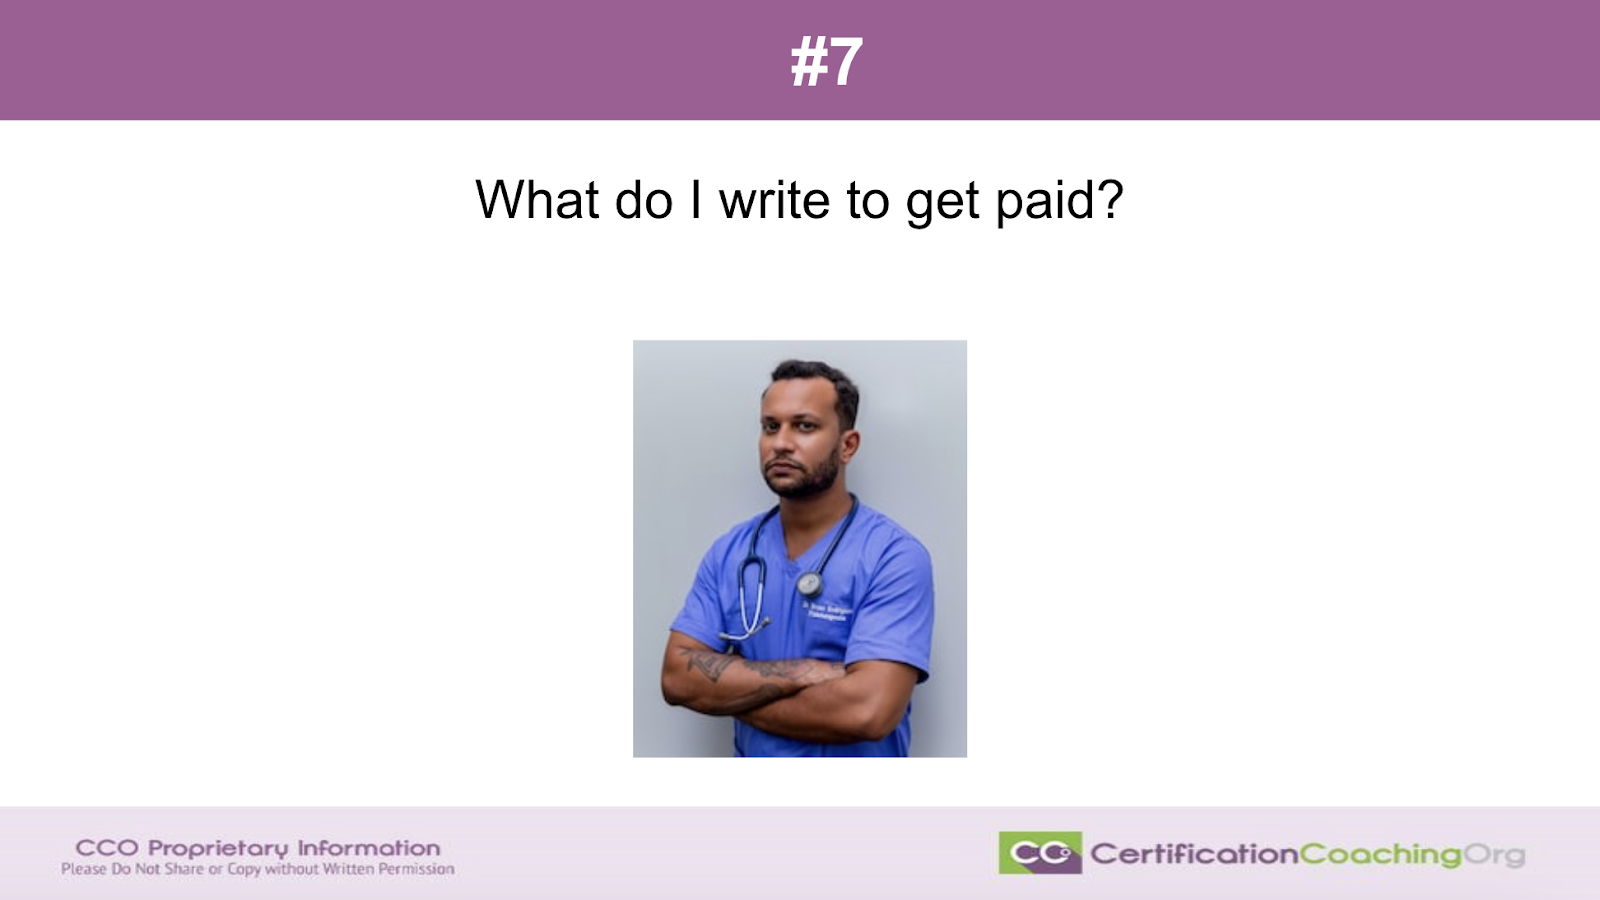 #7 What Do I Write To Get Paid?